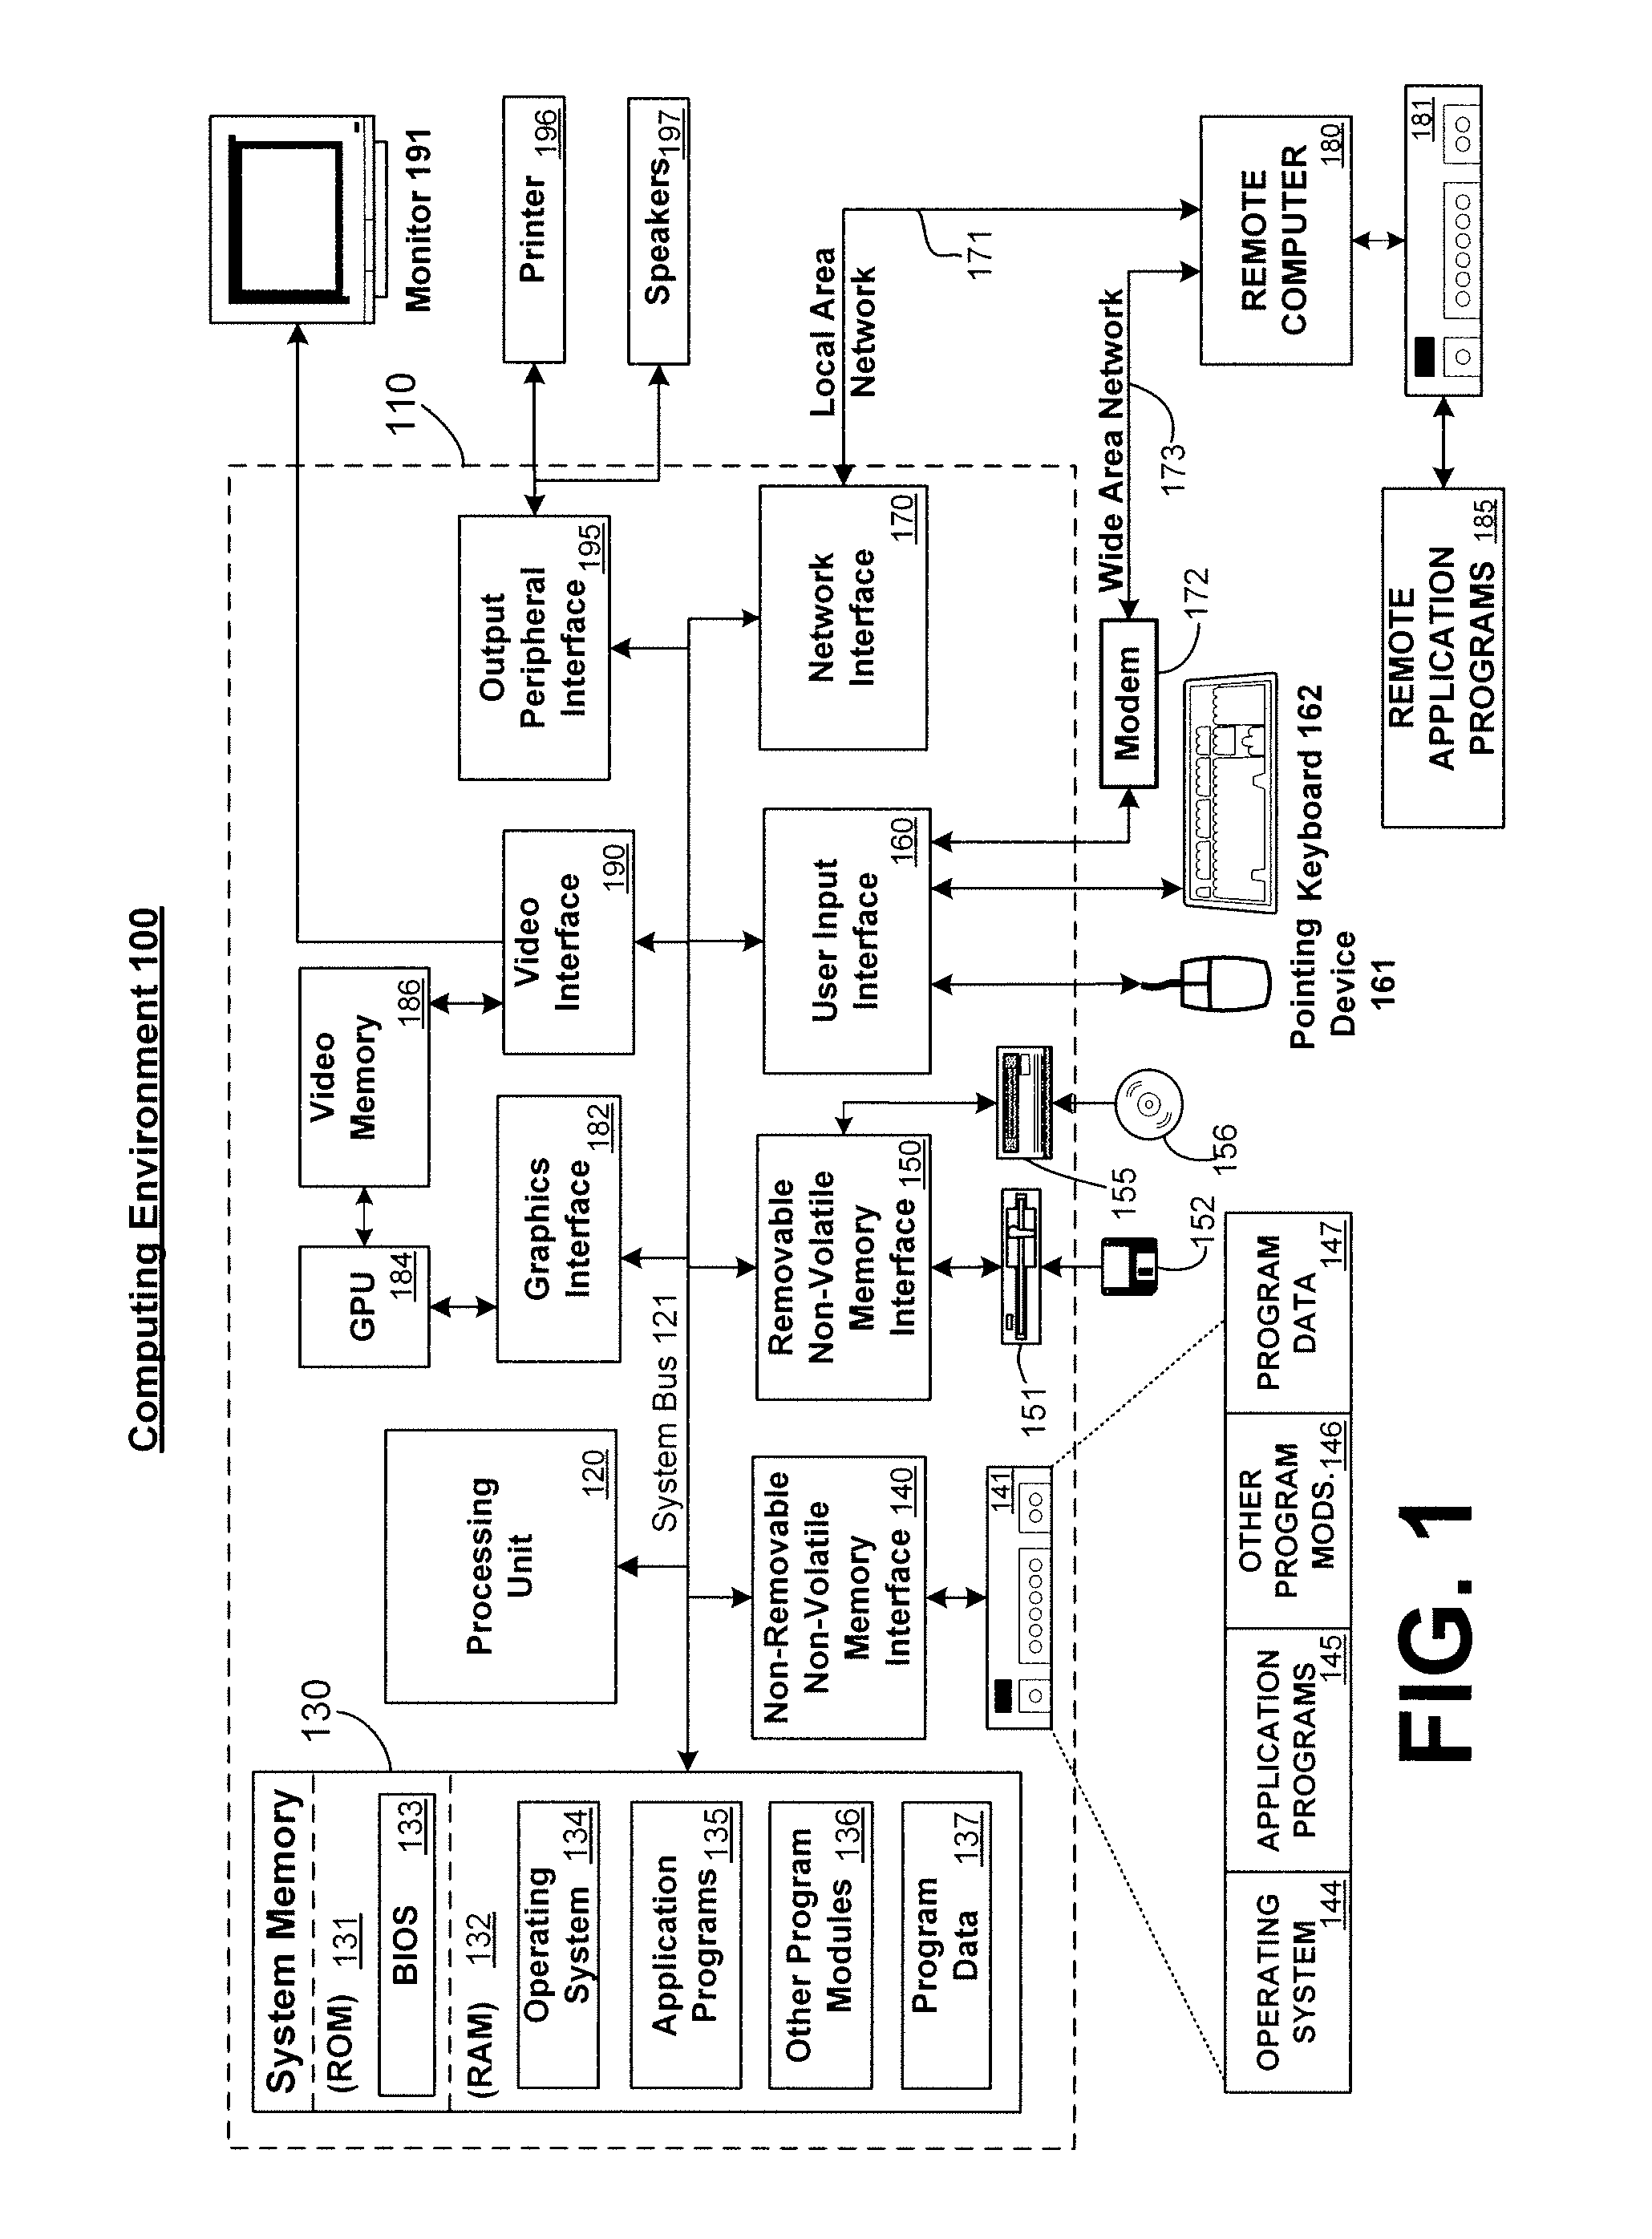 Method for managing multiple file states for replicated files